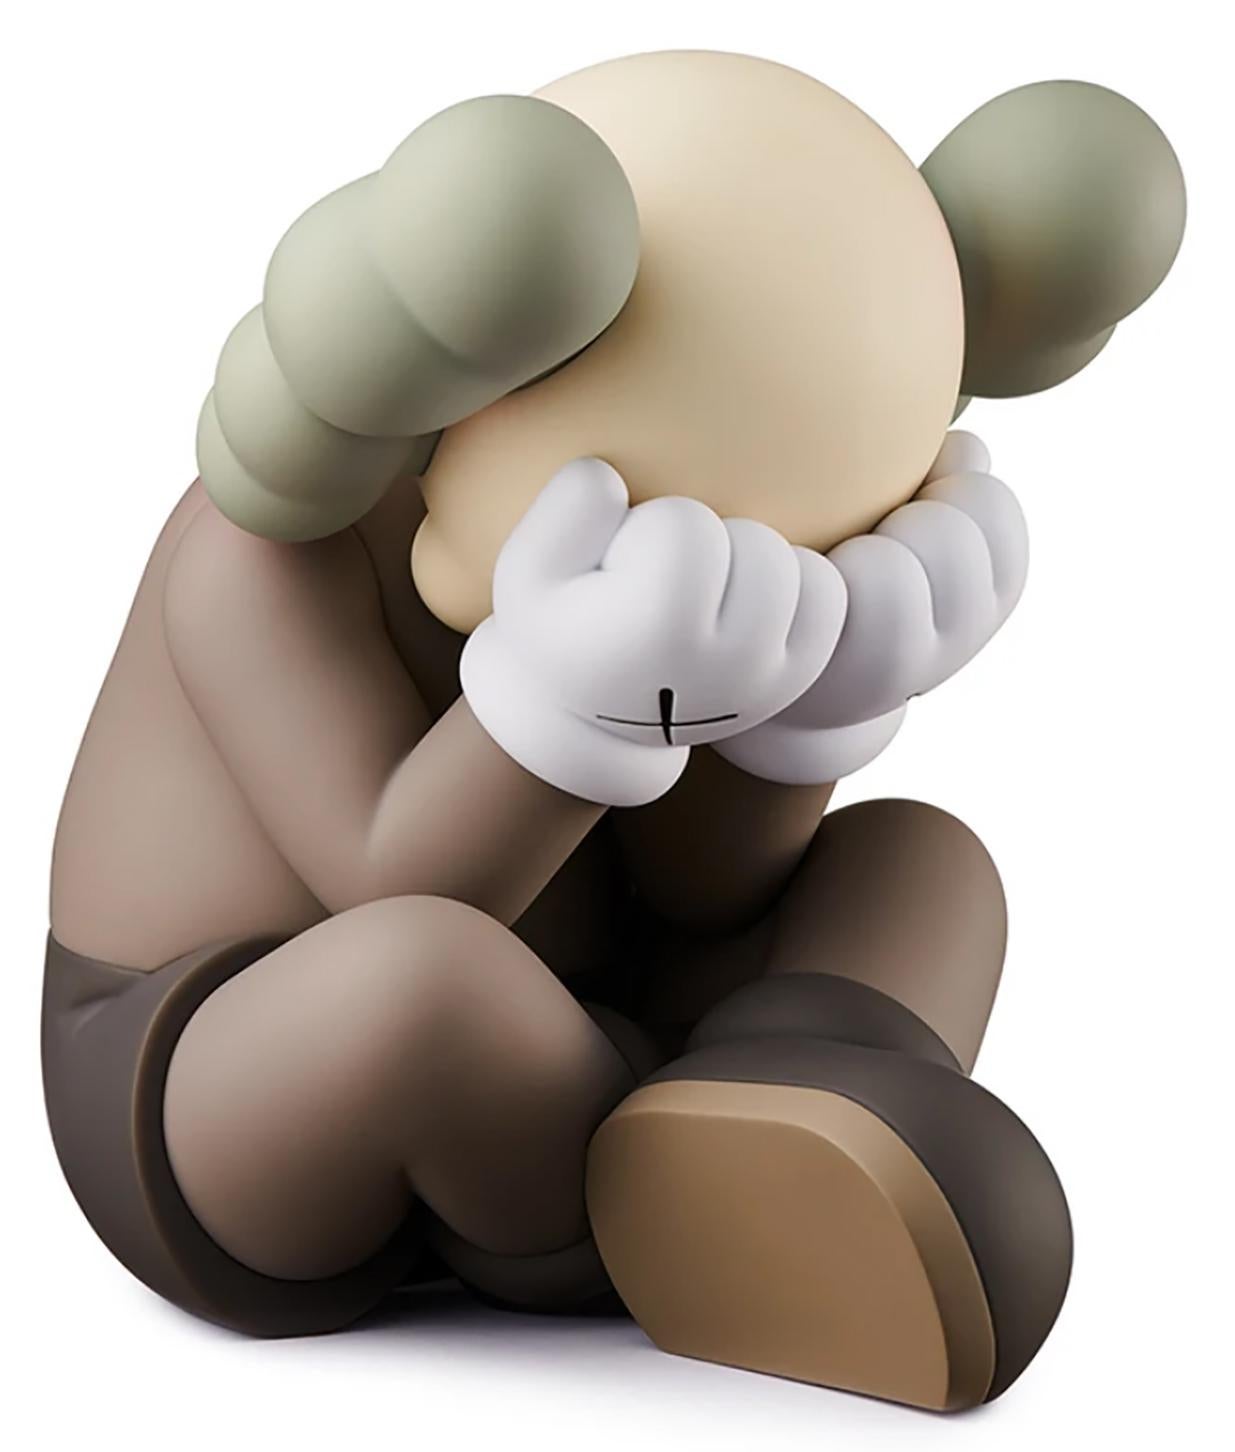 KAWS SEPARATED complete set of 3 works (KAWS Separated set)  For Sale 1